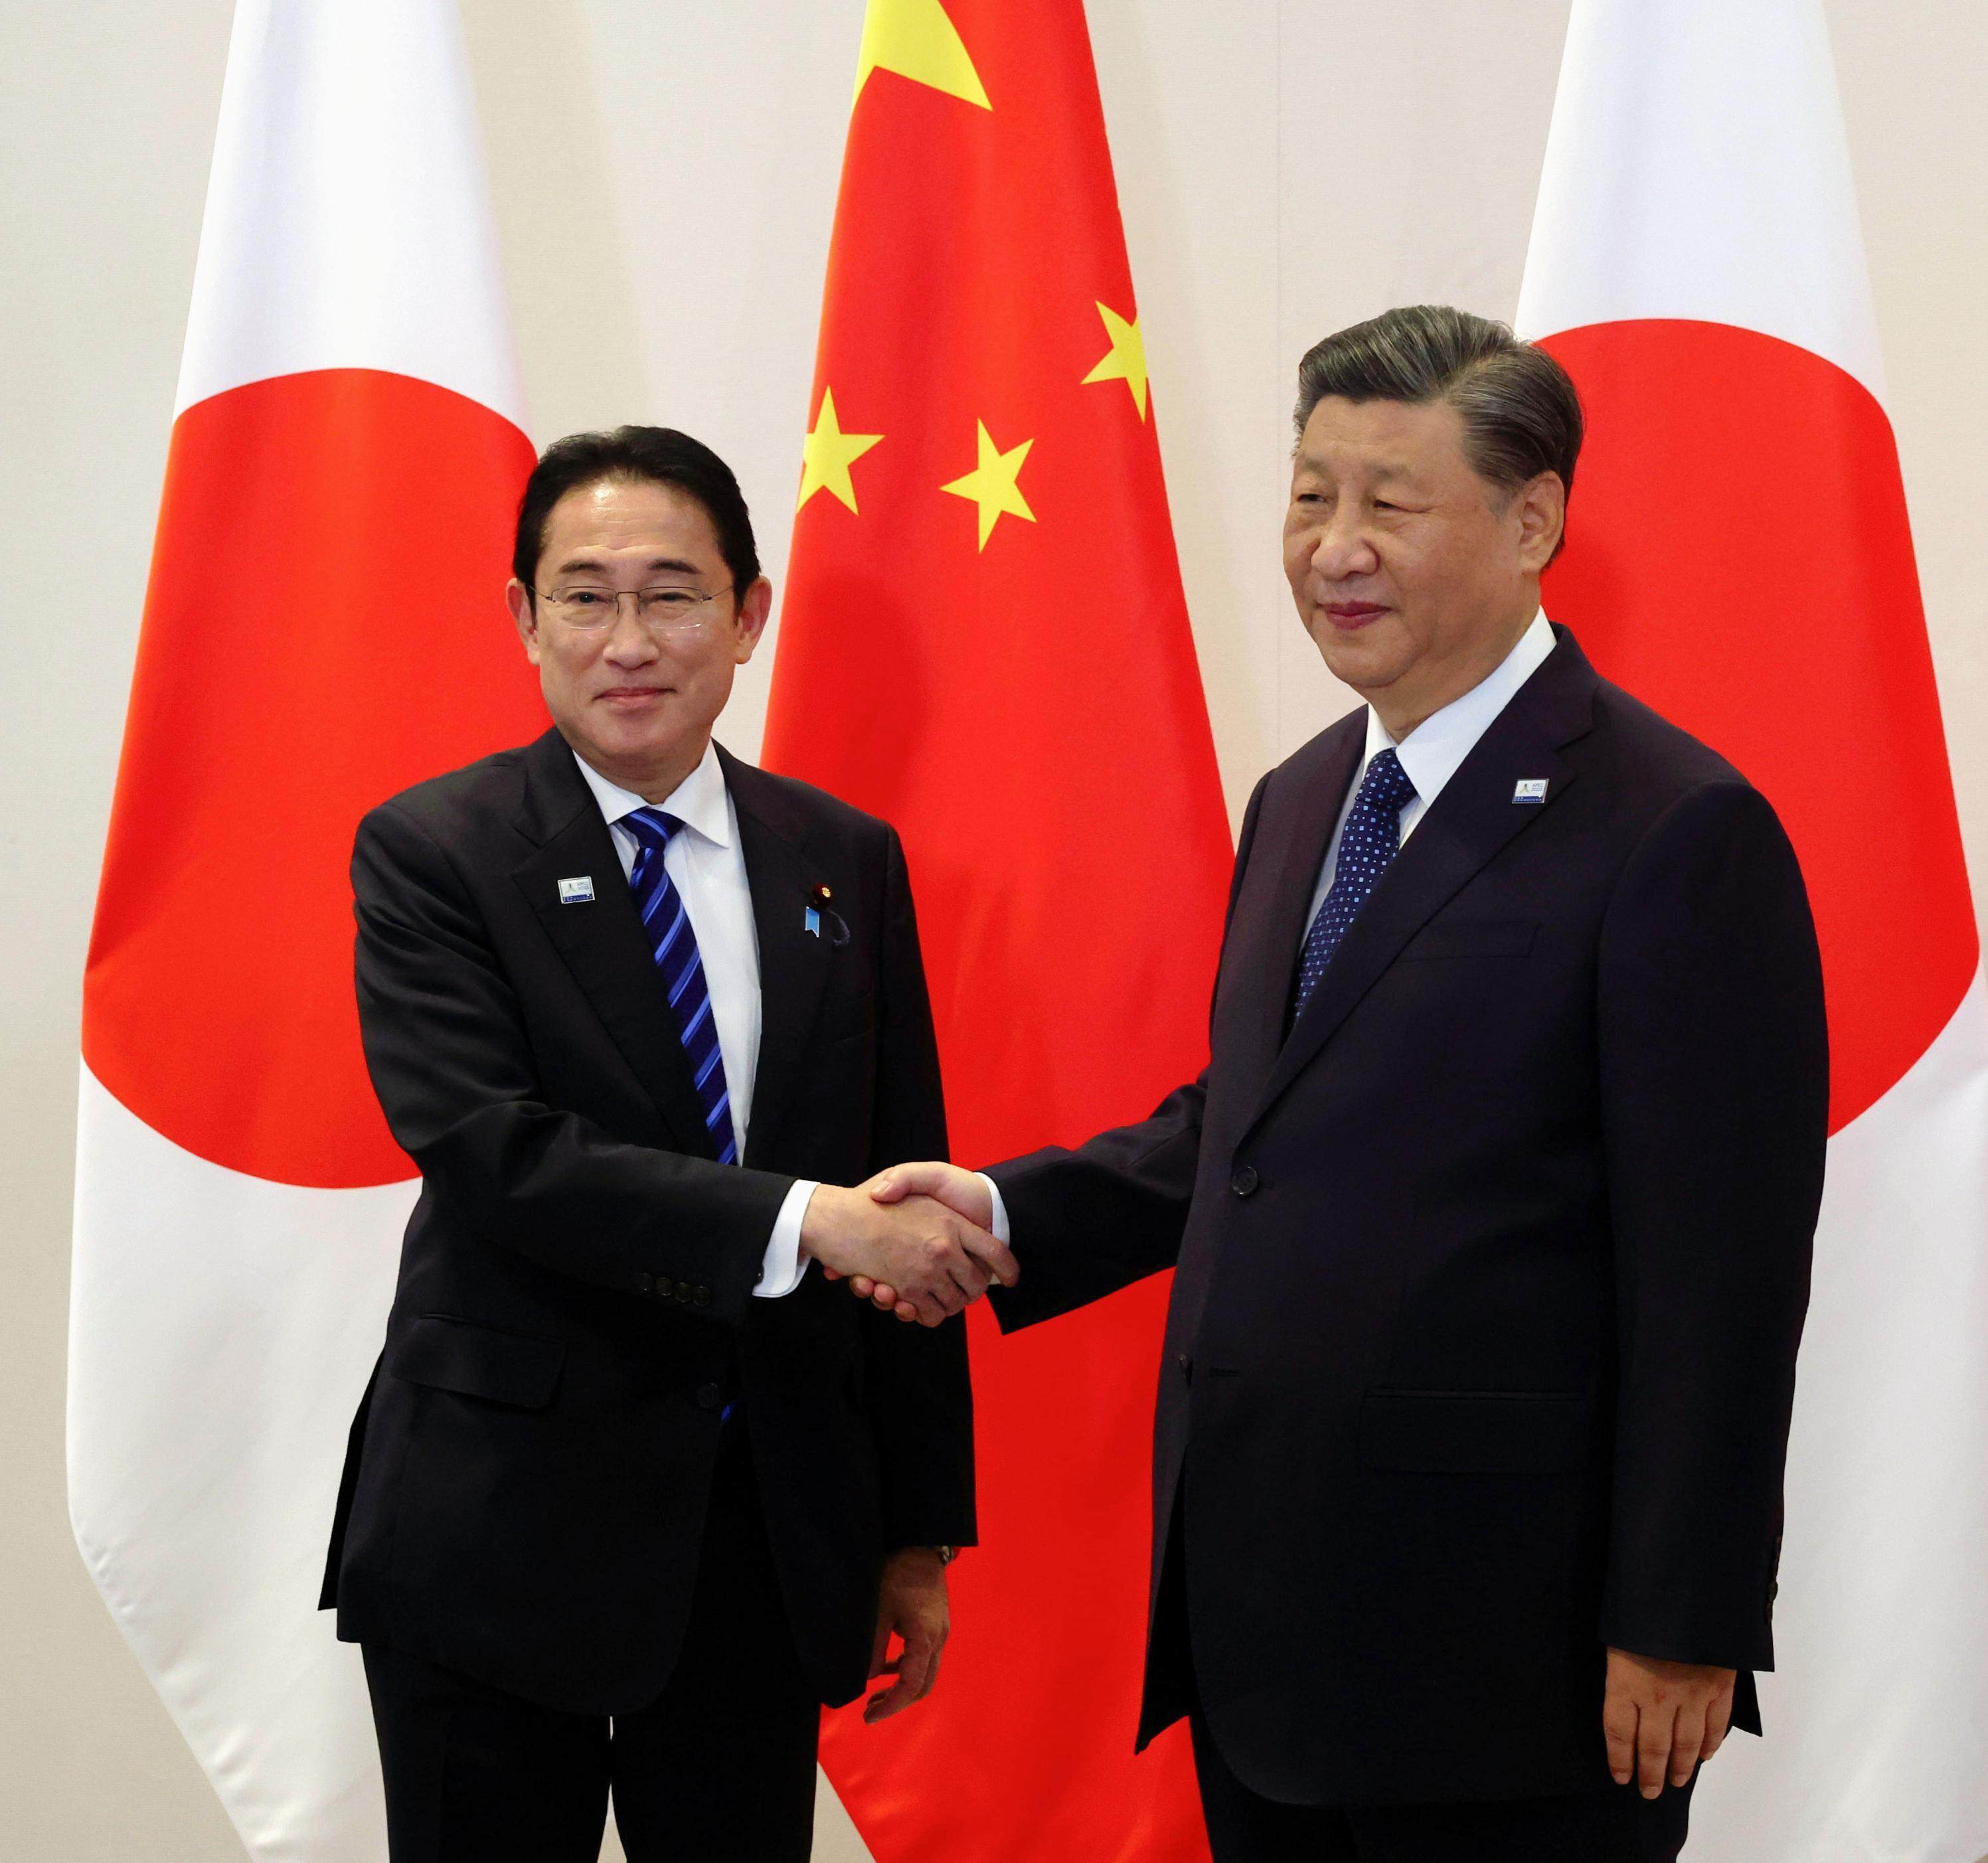 Japanese Prime Minister Fumio Kishida and Chinese President Xi Jinping shake hands during their meeting on Thursday in San Francisco, on the sidelines of a summit of the Asia-Pacific Economic Cooperation forum. Photo: Kyodo